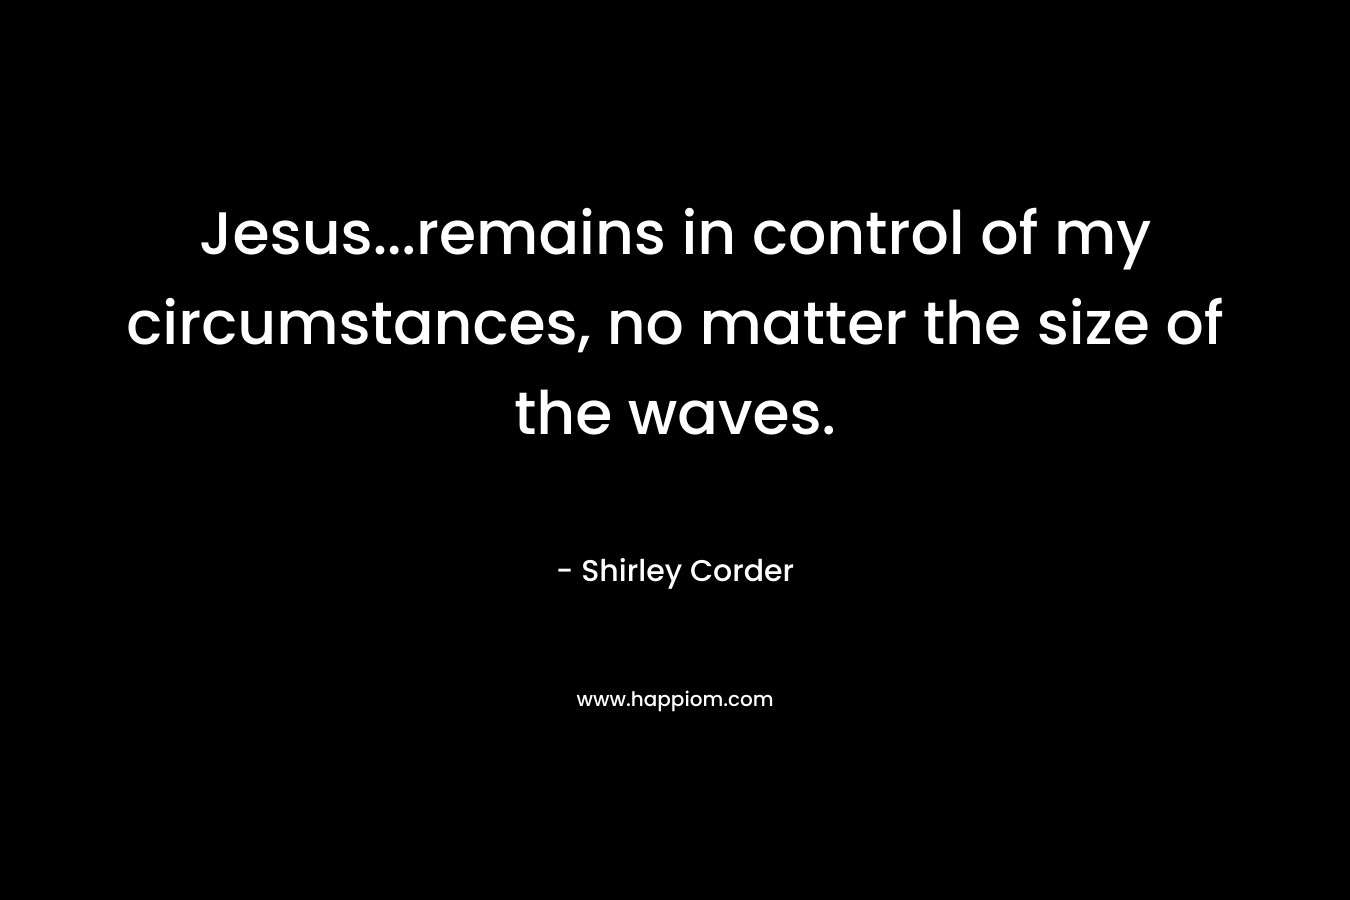 Jesus…remains in control of my circumstances, no matter the size of the waves. – Shirley Corder